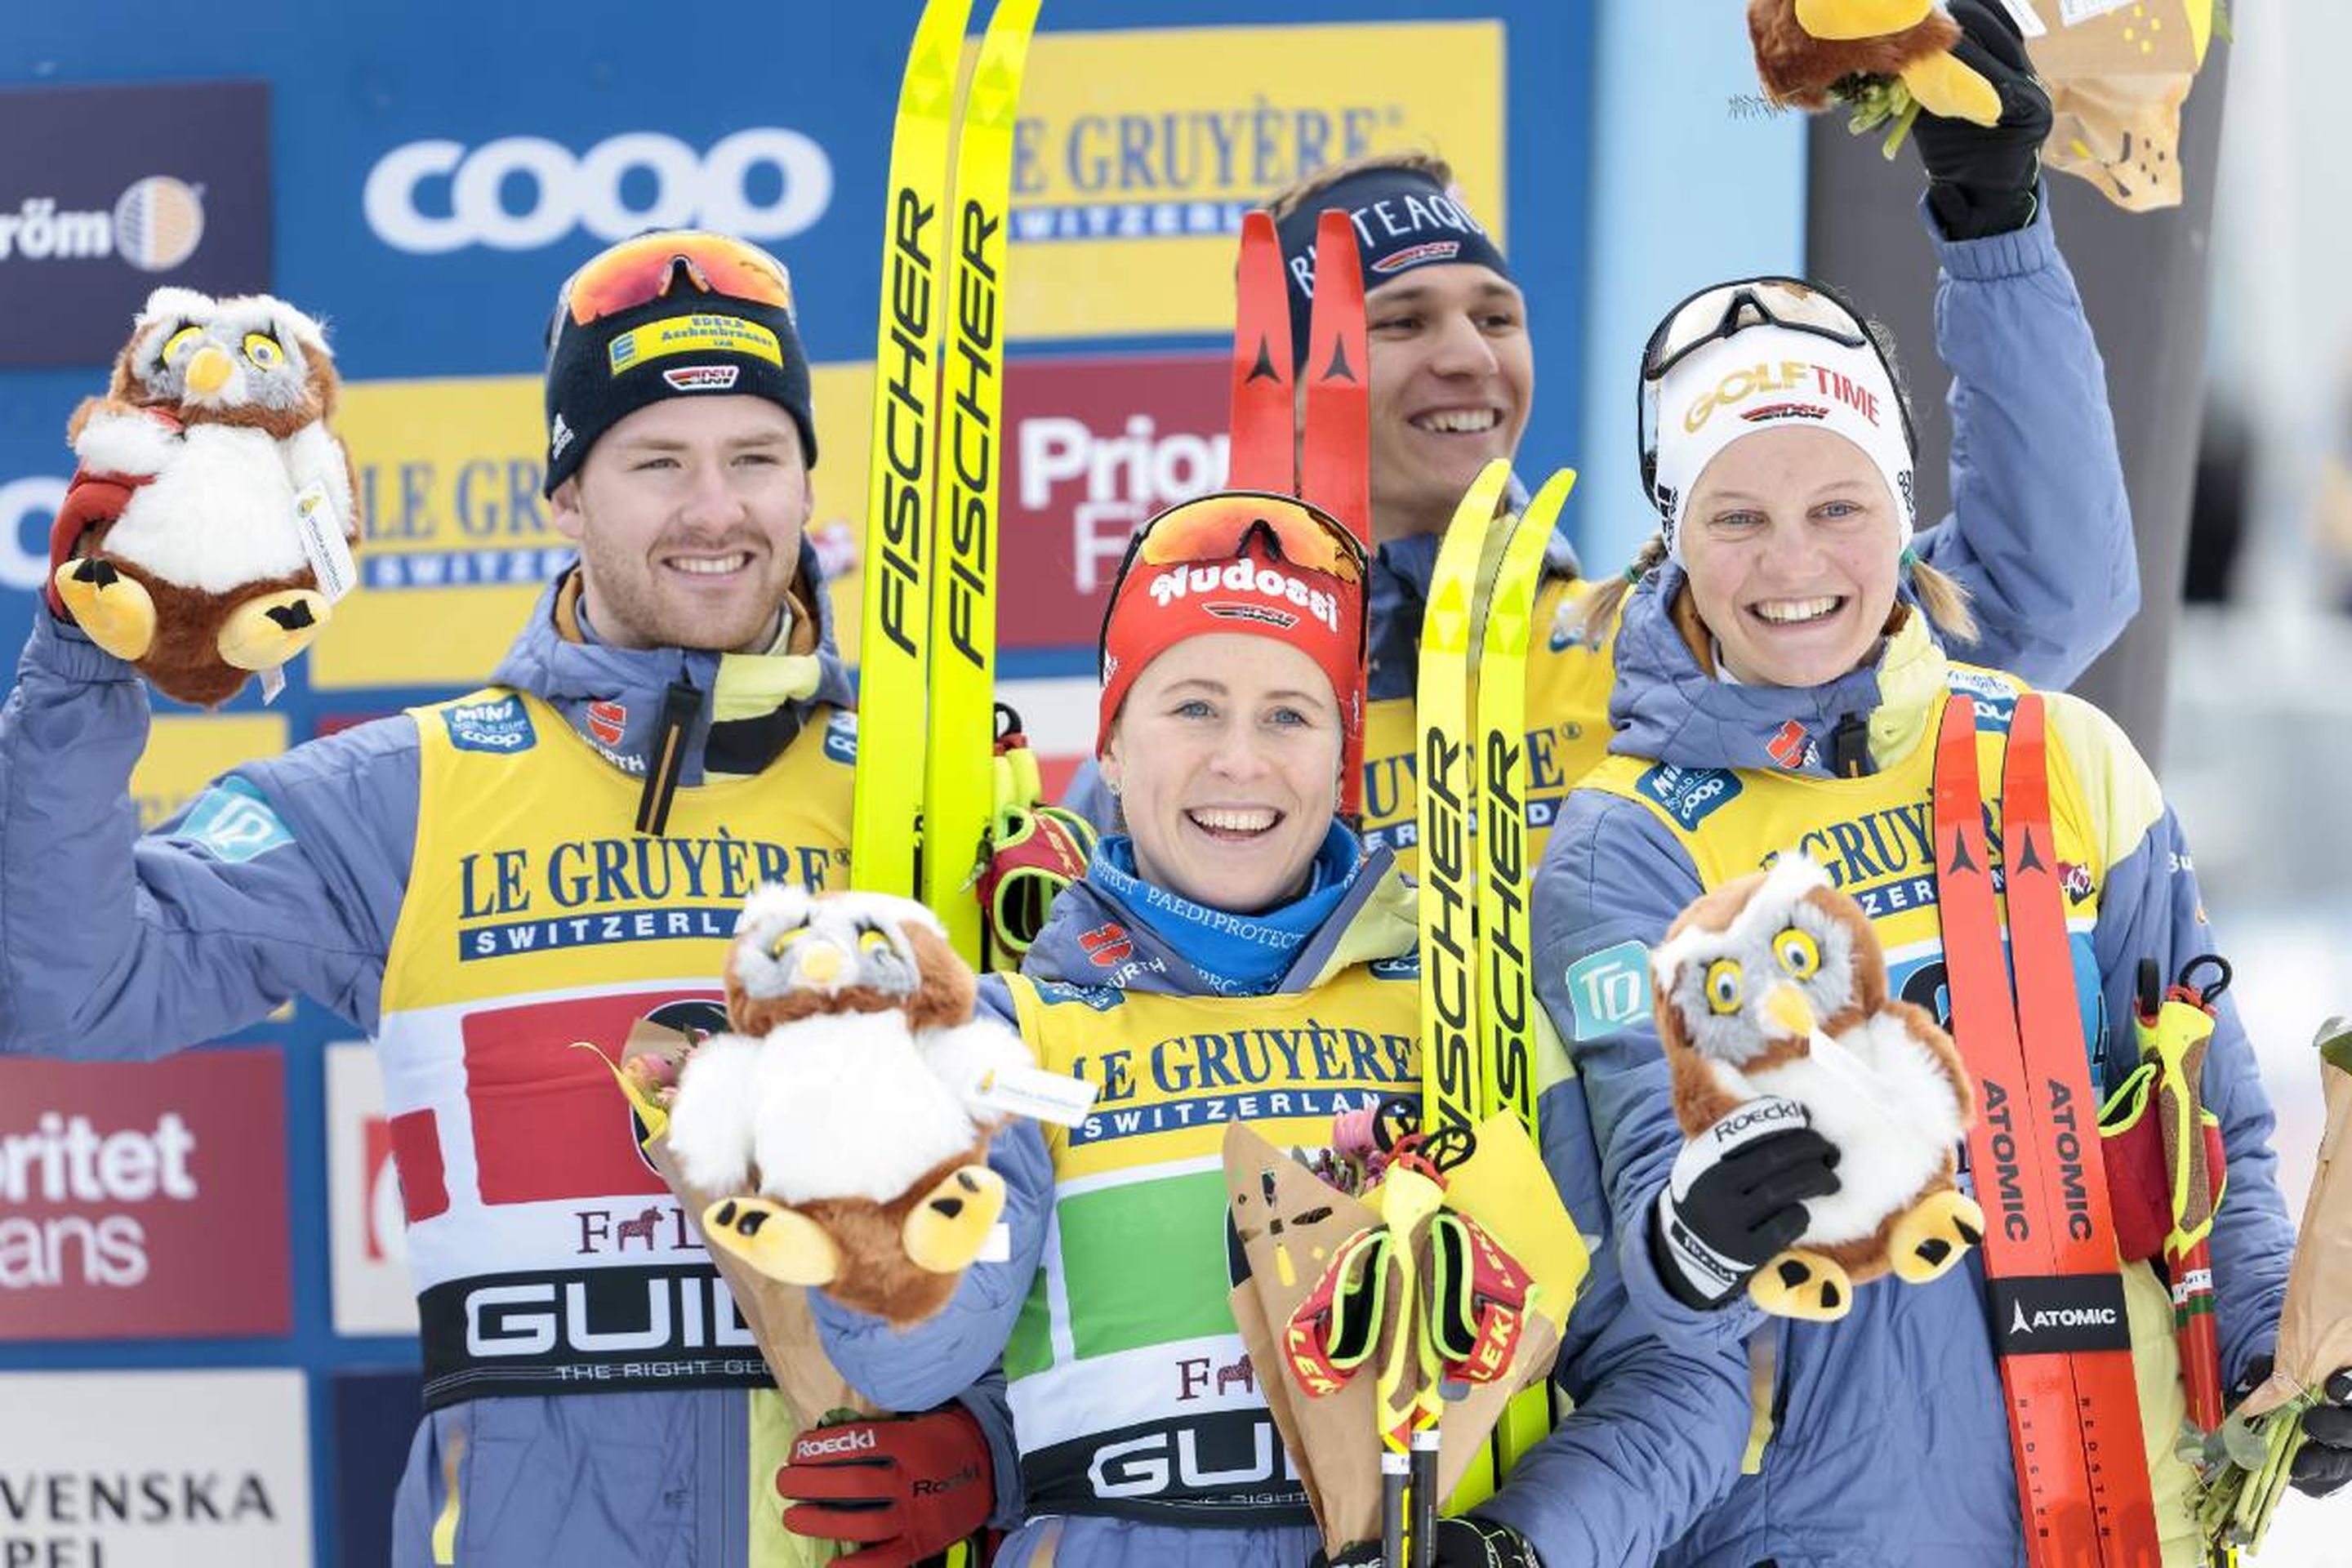 Germany's Albert Kuchler, Katharina Hennig, Anian Sossau and Victoria Carl celebrate their third place: @Nordic Focus.